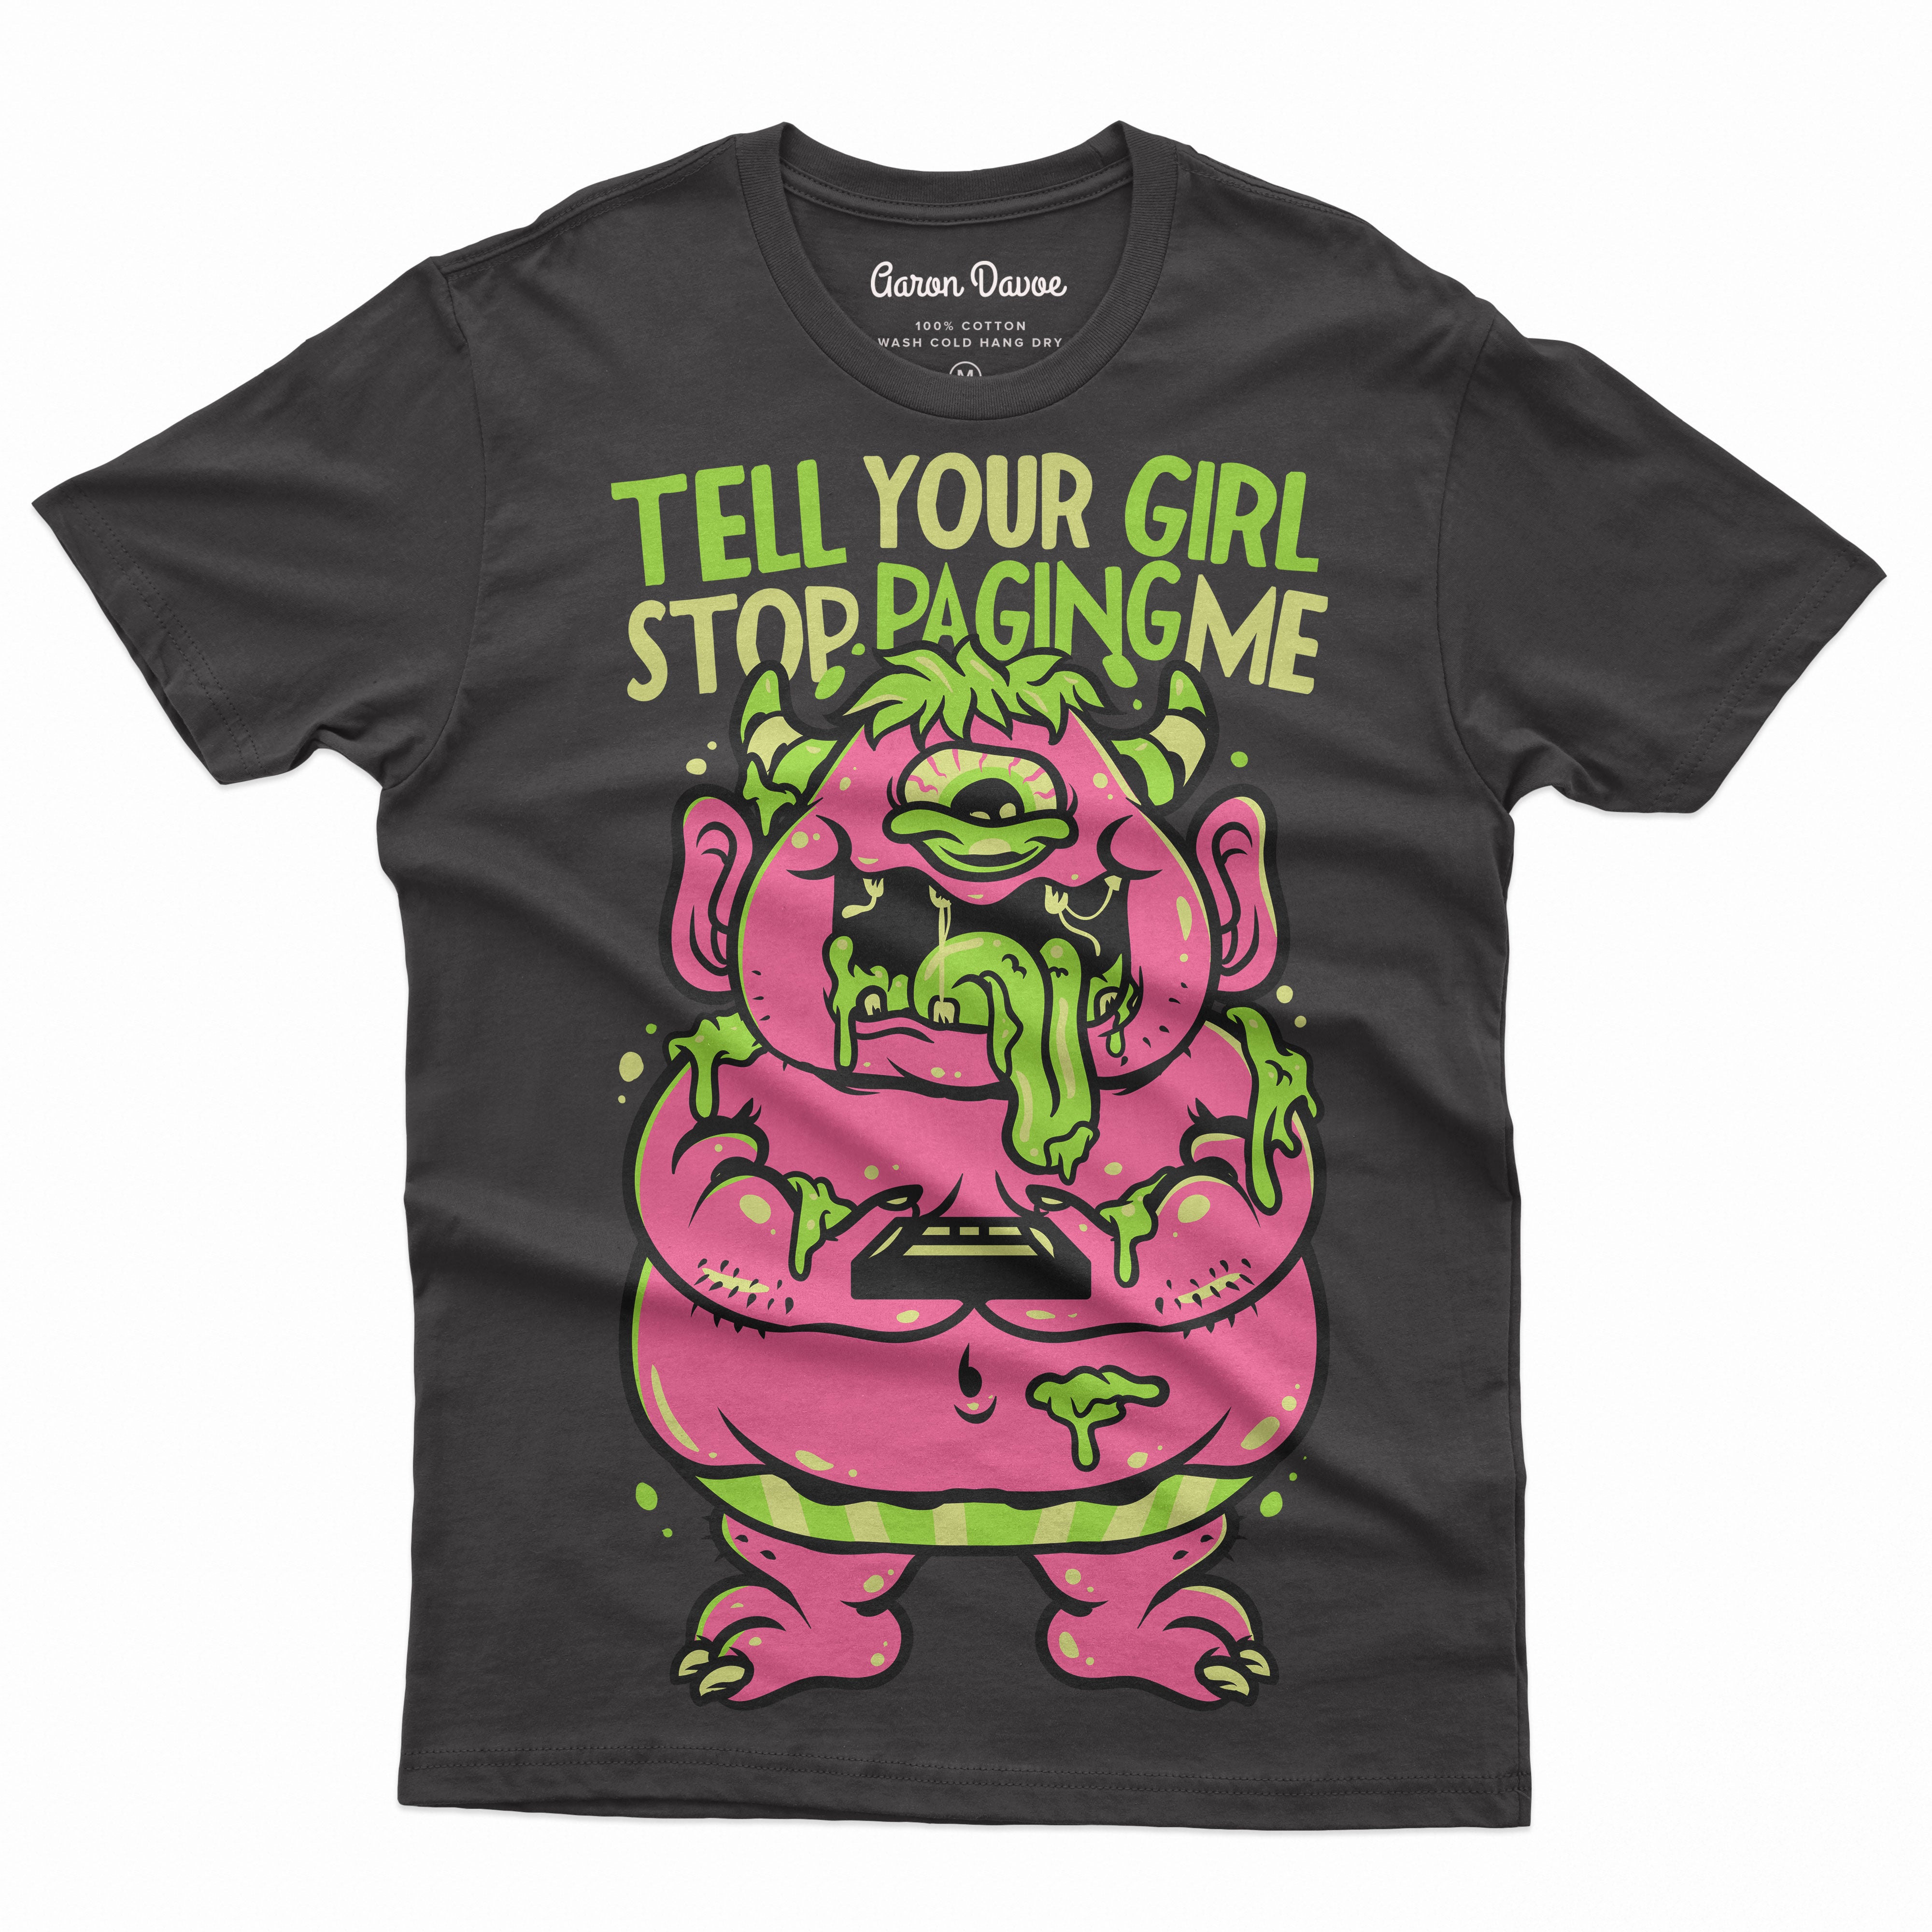 Tell Your Girl To Stop Paging Me freeshipping - Aarondavoe